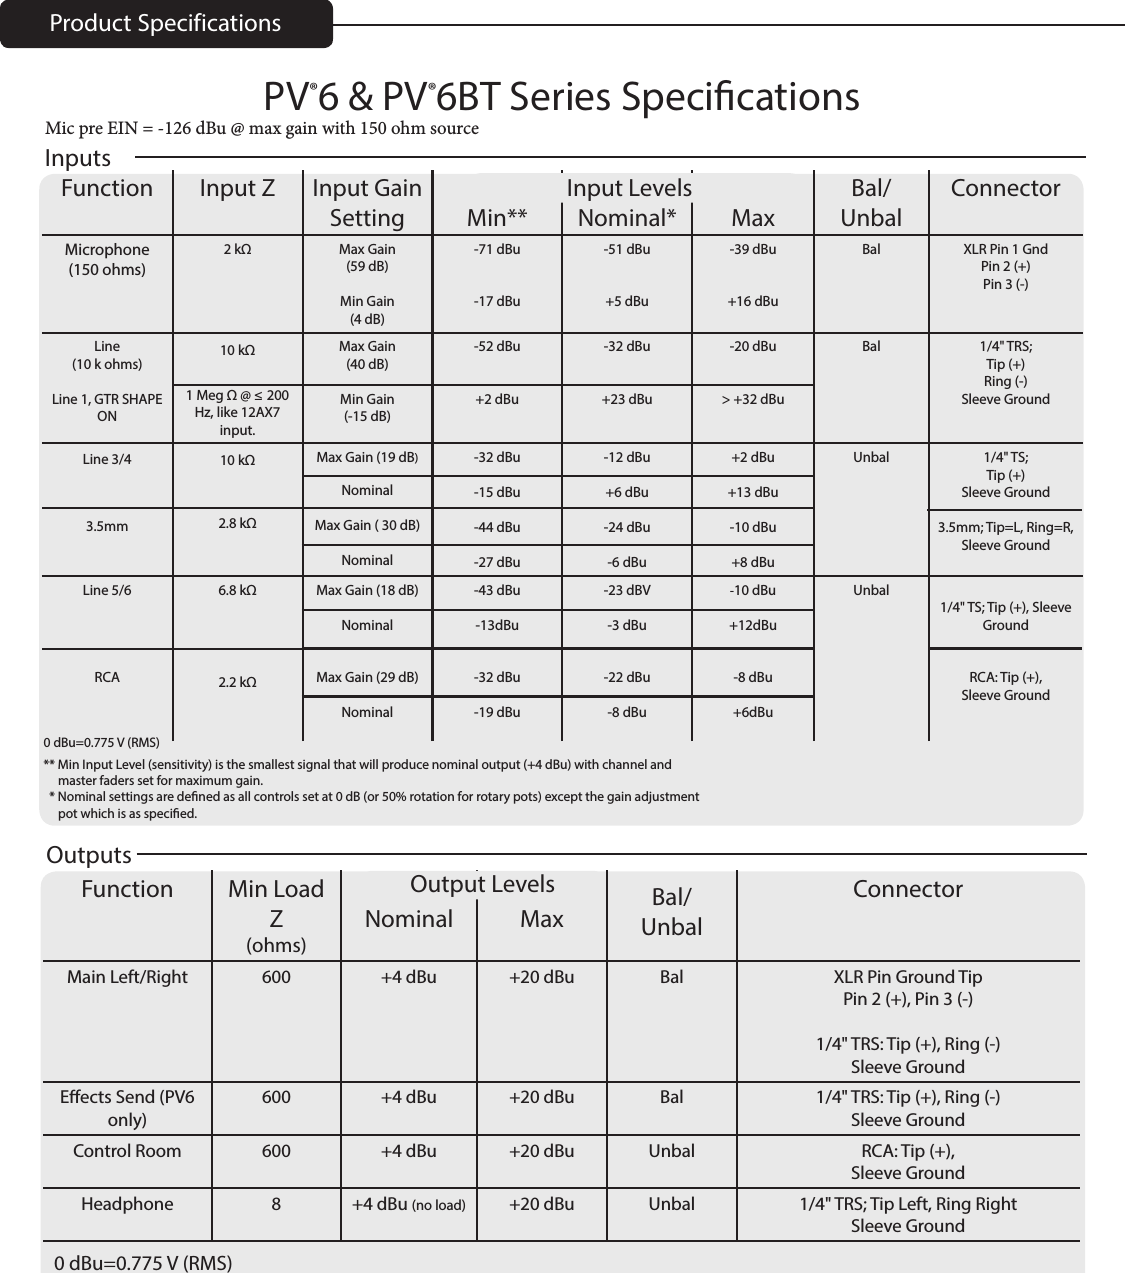 Product SpecificationsPV®6 &amp; PV®6BT Series SpecicationsInputsFunction Input Z Input Gain Setting Min** Nominal* MaxBal/UnbalConnectorMicrophone(150 ohms)2 kΩ Max Gain(59 dB)Min Gain(4 dB)-71 dBu-17 dBu-51 dBu+5 dBu-39 dBu+16 dBuBal XLR Pin 1 GndPin 2 (+)Pin 3 (-)Line(10 k ohms)Line 1, GTR SHAPE ON10 kΩ1 Meg Ω @ ≤ 200 Hz, like 12AX7 input.Max Gain(40 dB)Min Gain(-15 dB)-52 dBu+2 dBu-32 dBu+23 dBu-20 dBu&gt; +32 dBuBal 1/4&quot; TRS;Tip (+)Ring (-)Sleeve GroundLine 3/43.5mm10 kΩ2.8 kΩMax Gain (19 dB)NominalMax Gain ( 30 dB)Nominal-32 dBu-15 dBu-44 dBu-27 dBu-12 dBu+6 dBu-24 dBu-6 dBu+2 dBu+13 dBu-10 dBu+8 dBuUnbal 1/4&quot; TS;Tip (+)Sleeve Ground 3.5mm; Tip=L, Ring=R,Sleeve GroundLine 5/6RCA6.8 kΩ2.2 kΩMax Gain (18 dB)Nominal Max Gain (29 dB)Nominal-43 dBu-13dBu-32 dBu-19 dBu-23 dBV-3 dBu-22 dBu-8 dBu-10 dBu+12dBu-8 dBu+6dBuUnbal1/4&quot; TS; Tip (+), Sleeve GroundRCA: Tip (+),Sleeve GroundInput Levels0 dBu=0.775 V (RMS)** Min Input Level (sensitivity) is the smallest signal that will produce nominal output (+4 dBu) with channel and      master faders set for maximum gain.  * Nominal settings are dened as all controls set at 0 dB (or 50% rotation for rotary pots) except the gain adjustment         pot which is as specied.OutputsFunction Min Load Z(ohms)Nominal Max Bal/UnbalConnectorMain Left/Right 600 +4 dBu +20 dBu Bal XLR Pin Ground TipPin 2 (+), Pin 3 (-)1/4&quot; TRS: Tip (+), Ring (-) Sleeve GroundEects Send (PV6 only)600 +4 dBu +20 dBu Bal 1/4&quot; TRS: Tip (+), Ring (-) Sleeve GroundControl Room 600 +4 dBu +20 dBu Unbal RCA: Tip (+),Sleeve GroundHeadphone 8 +4 dBu (no load) +20 dBu Unbal 1/4&quot; TRS; Tip Left, Ring Right Sleeve GroundOutput Levels0 dBu=0.775 V (RMS)Mic pre EIN = -126 dBu @ max gain with 150 ohm source